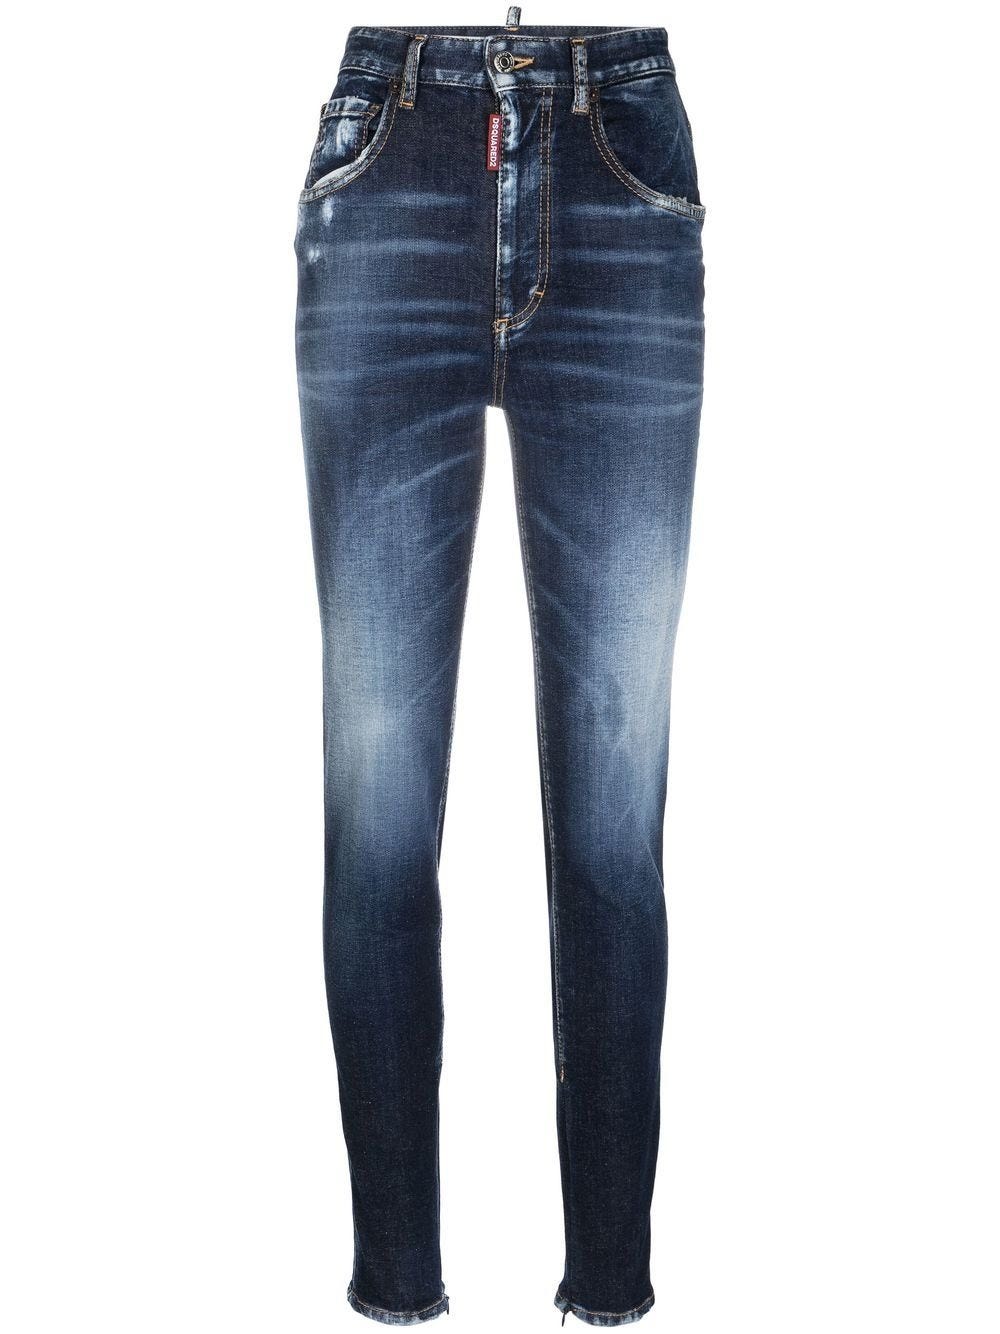 DSQUARED2 BLUE HIGH WAISTED FADED SKINNY JEANS